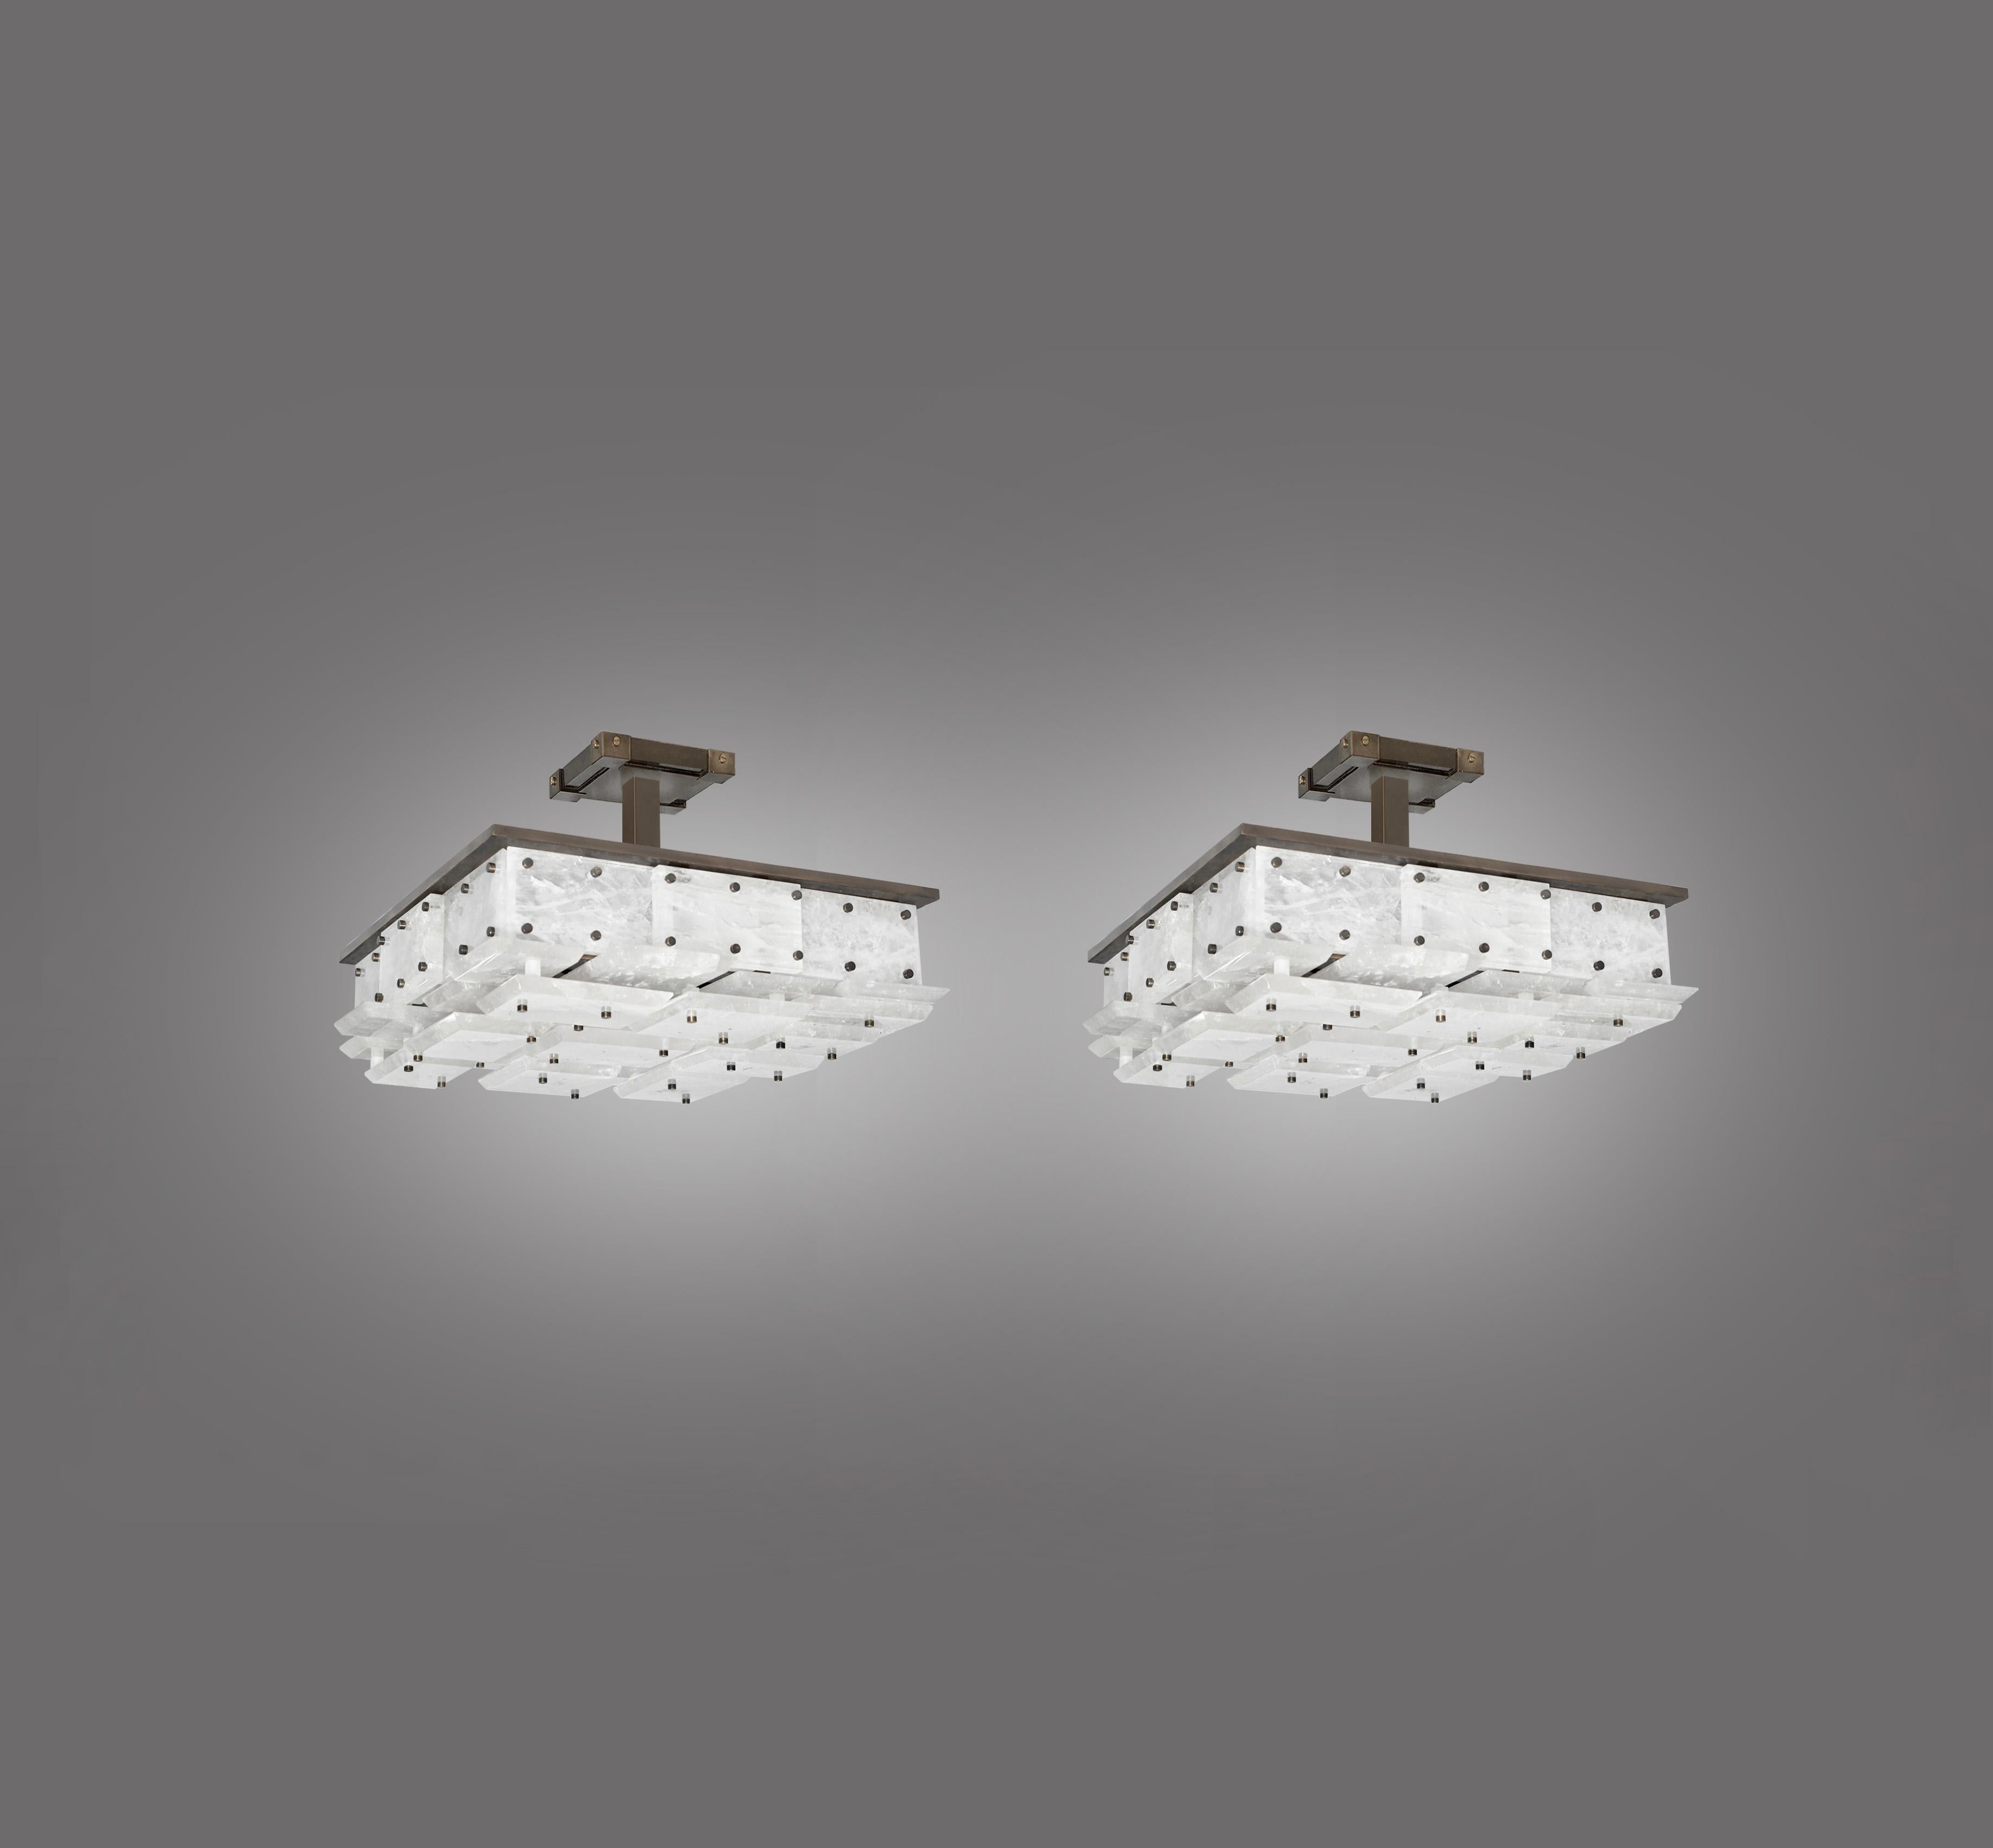 Pair of modern rock crystal semi flush mounts with multiple panels decorations, antique brass mount. Created by Phoenix Gallery NYC.
  